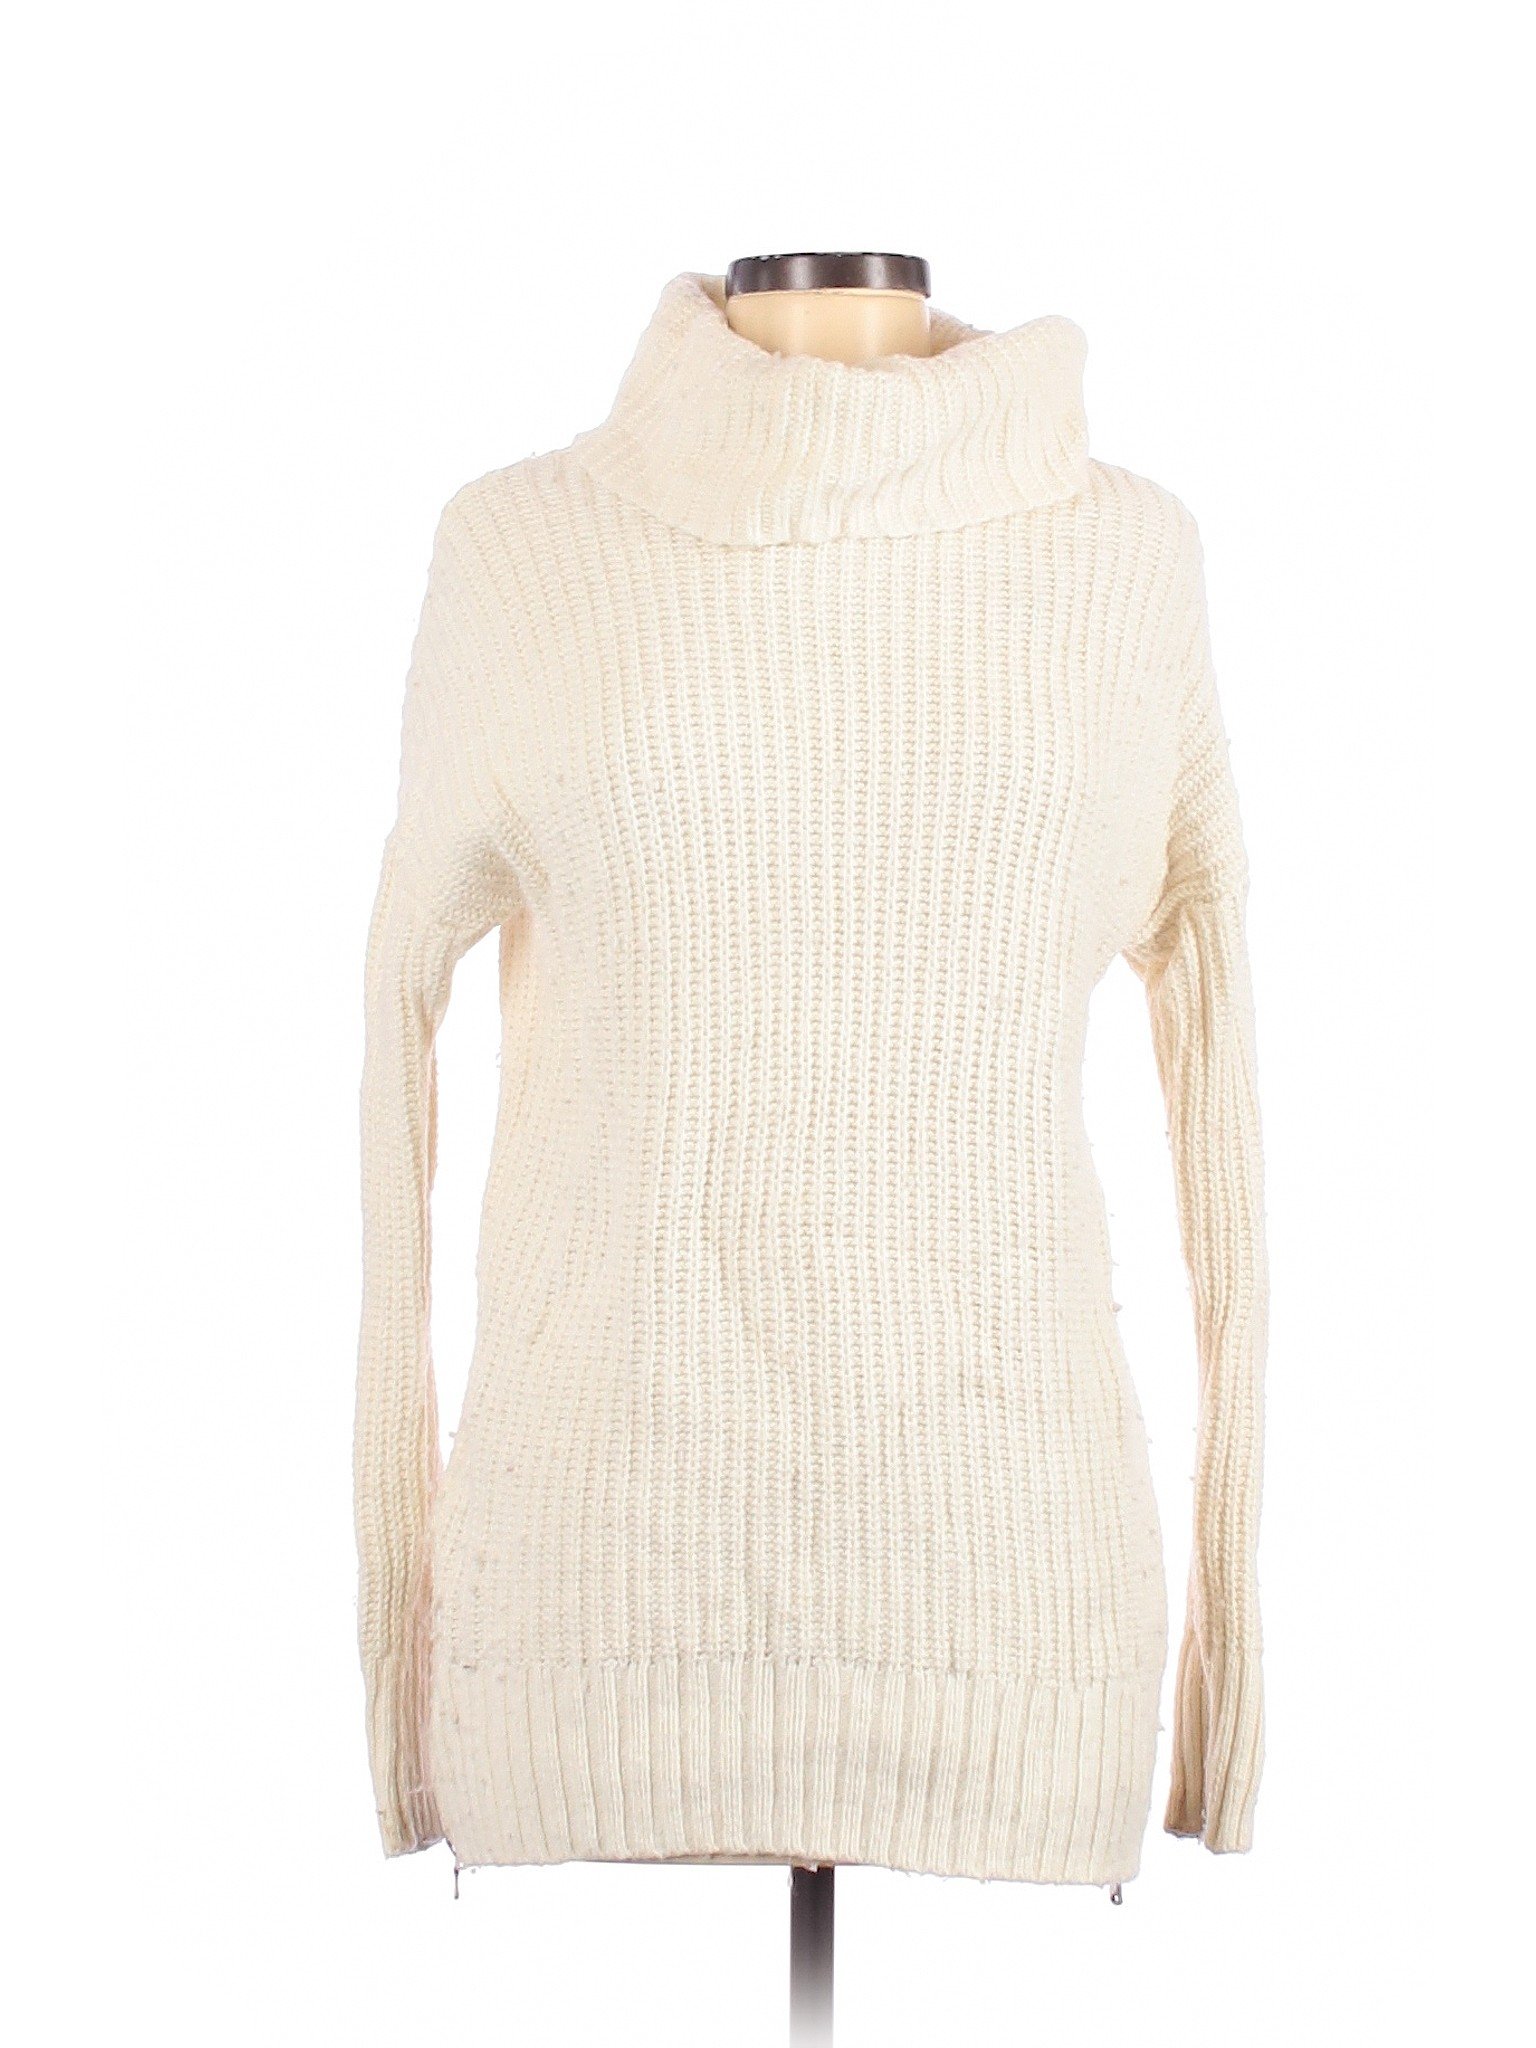 American Eagle Outfitters Women Ivory Turtleneck Sweater M | eBay